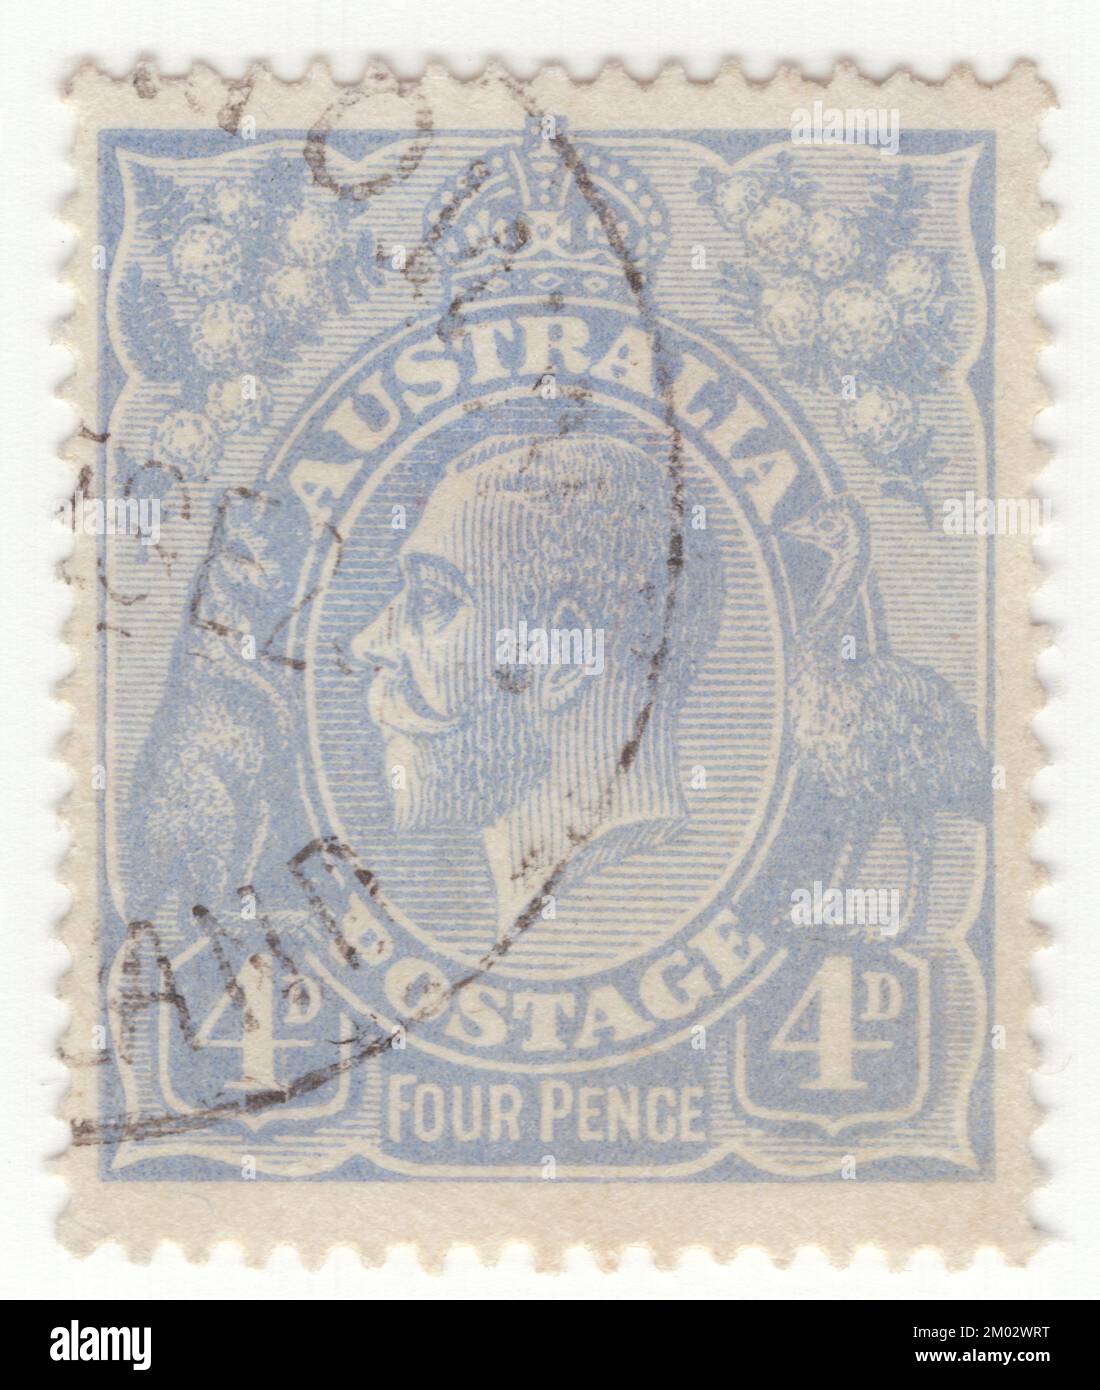 AUSTRALIA — 1922: An 4 pences light ultramarine postage stamp showing portrait of King George V (George Frederick Ernest Albert) was King of the United Kingdom and the British Dominions, and Emperor of India, from 6 May 1910 until his death in 1936. Born during the reign of his grandmother Queen Victoria, George was the second son of Albert Edward, Prince of Wales, and was third in the line of succession to the British throne behind his father and his elder brother, Prince Albert Victor Stock Photo